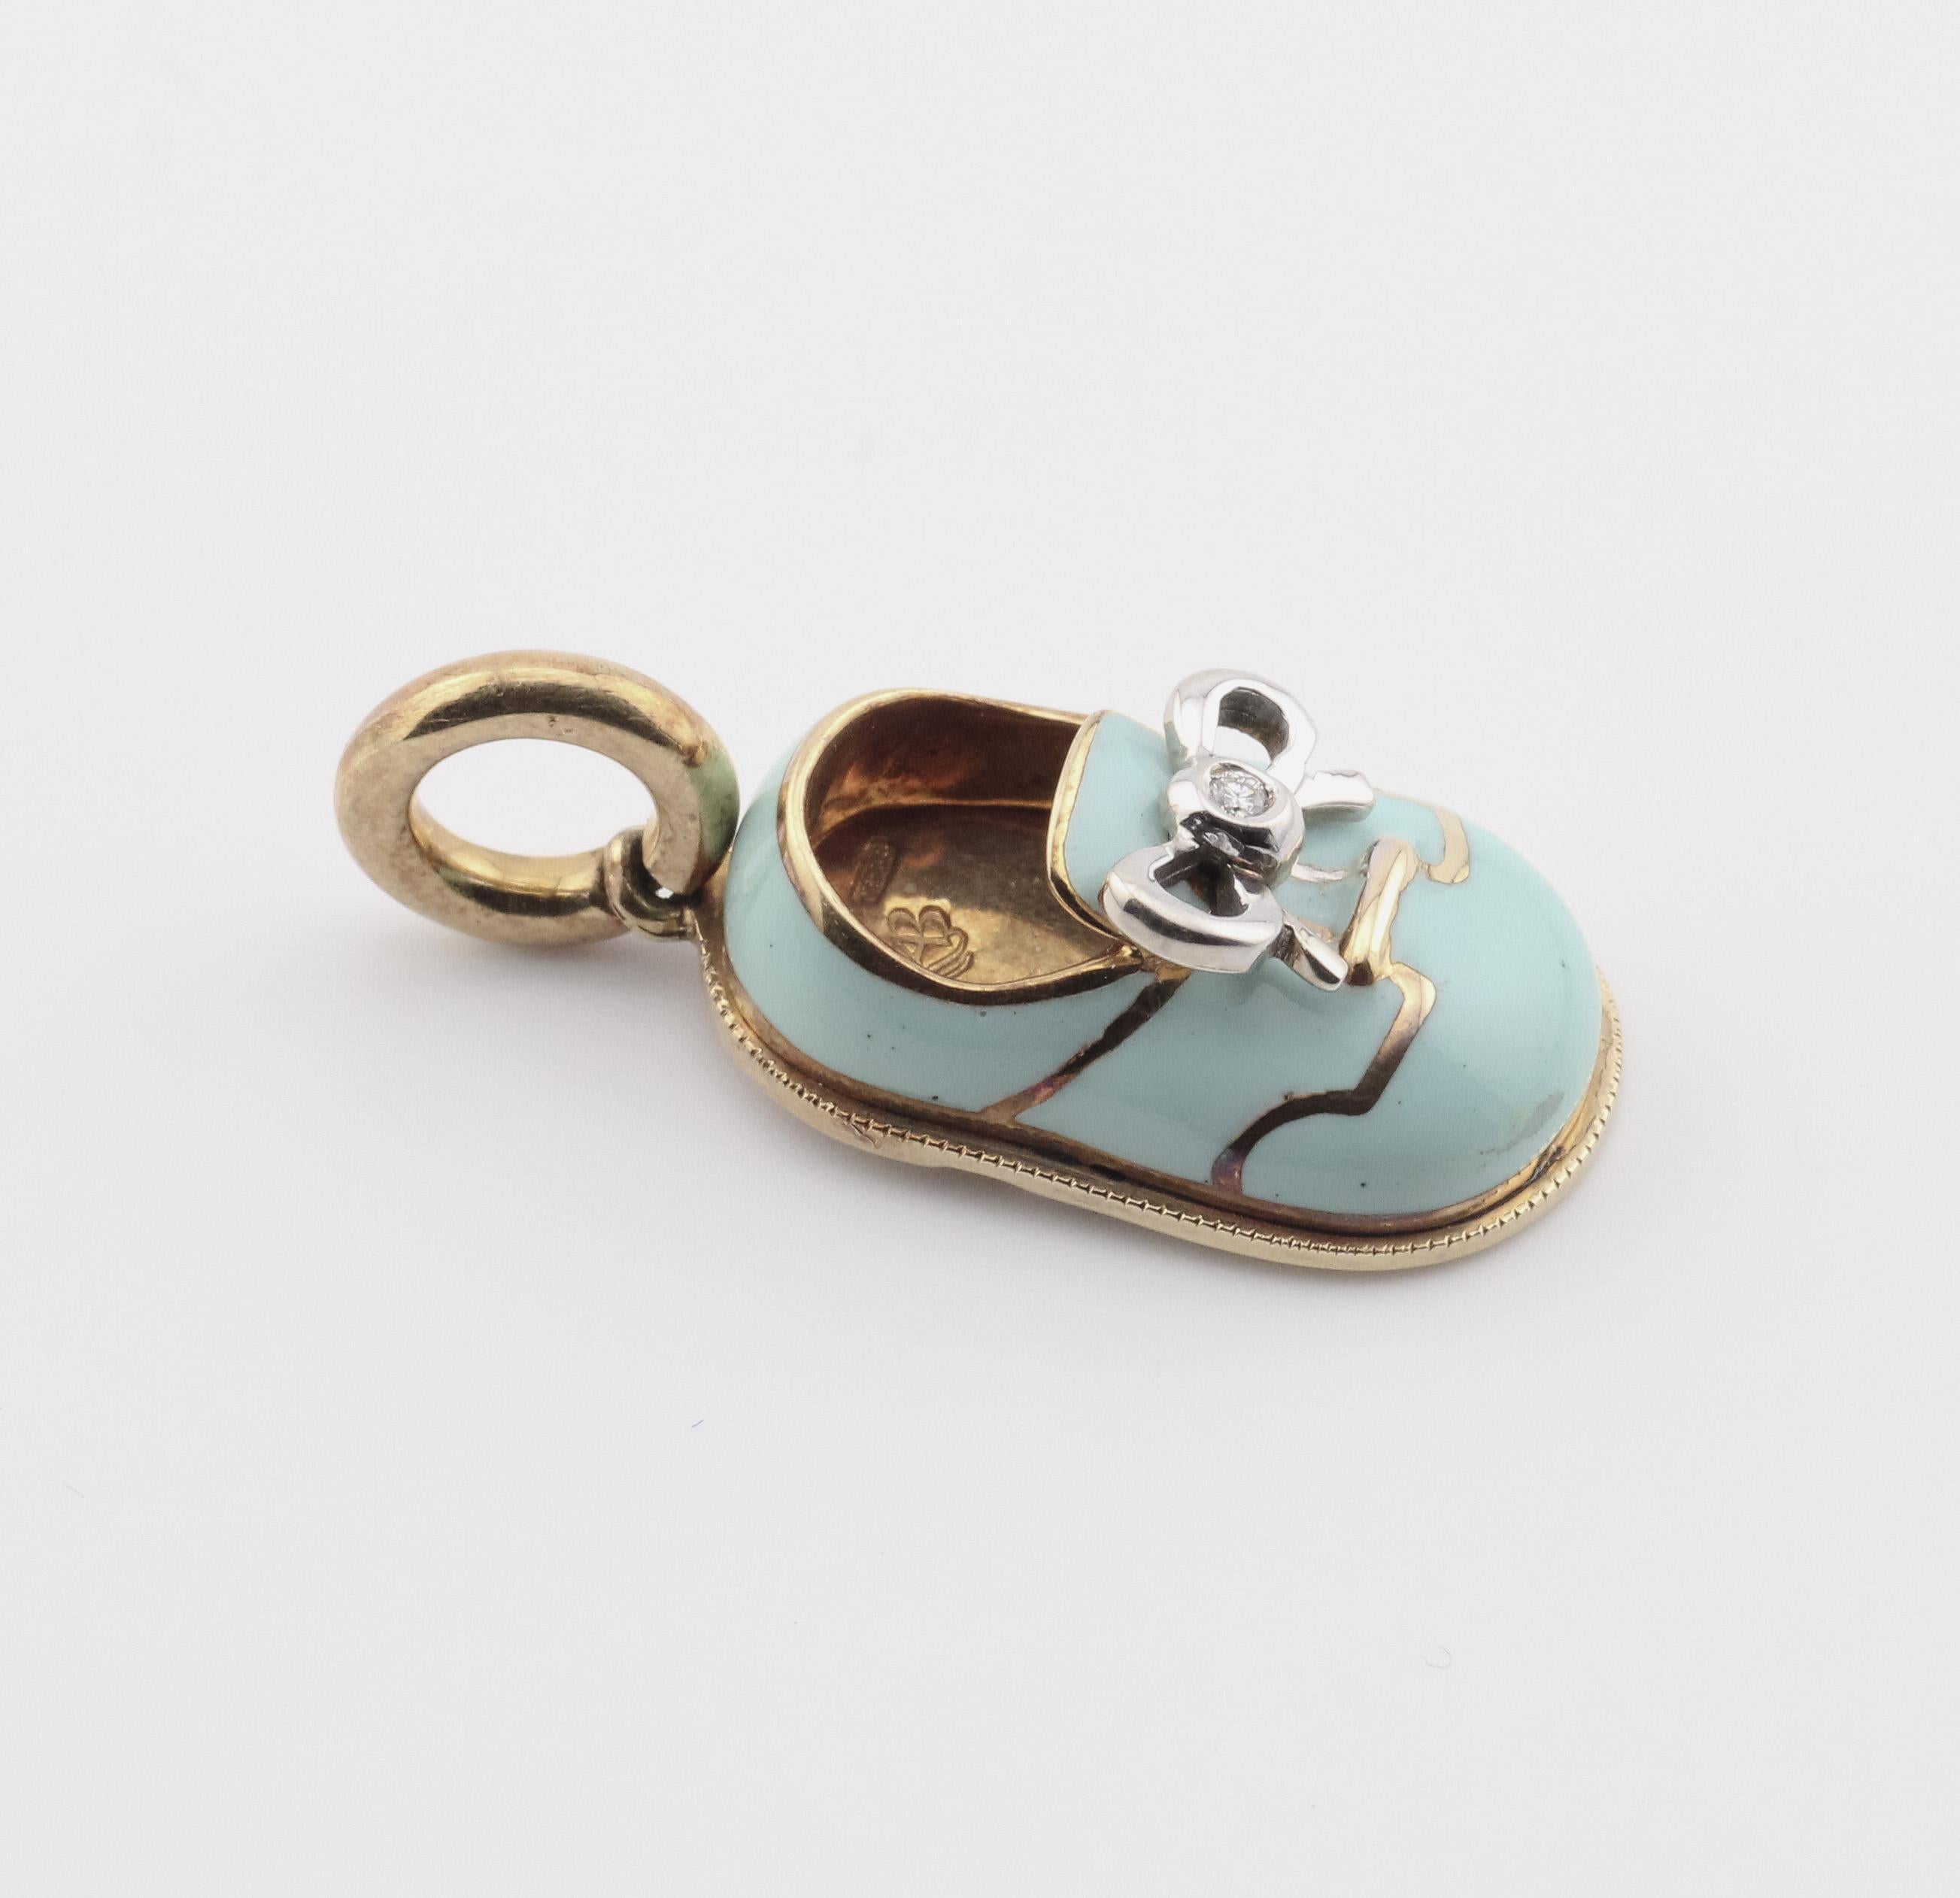 Introducing the Aaron Basha Diamond 18K Yellow Gold Tiffany Blue Enamel Baby Shoe Charm Pendant—a whimsical and sentimental treasure that combines luxury with playful elegance. Crafted by the renowned designer Aaron Basha, this charming pendant